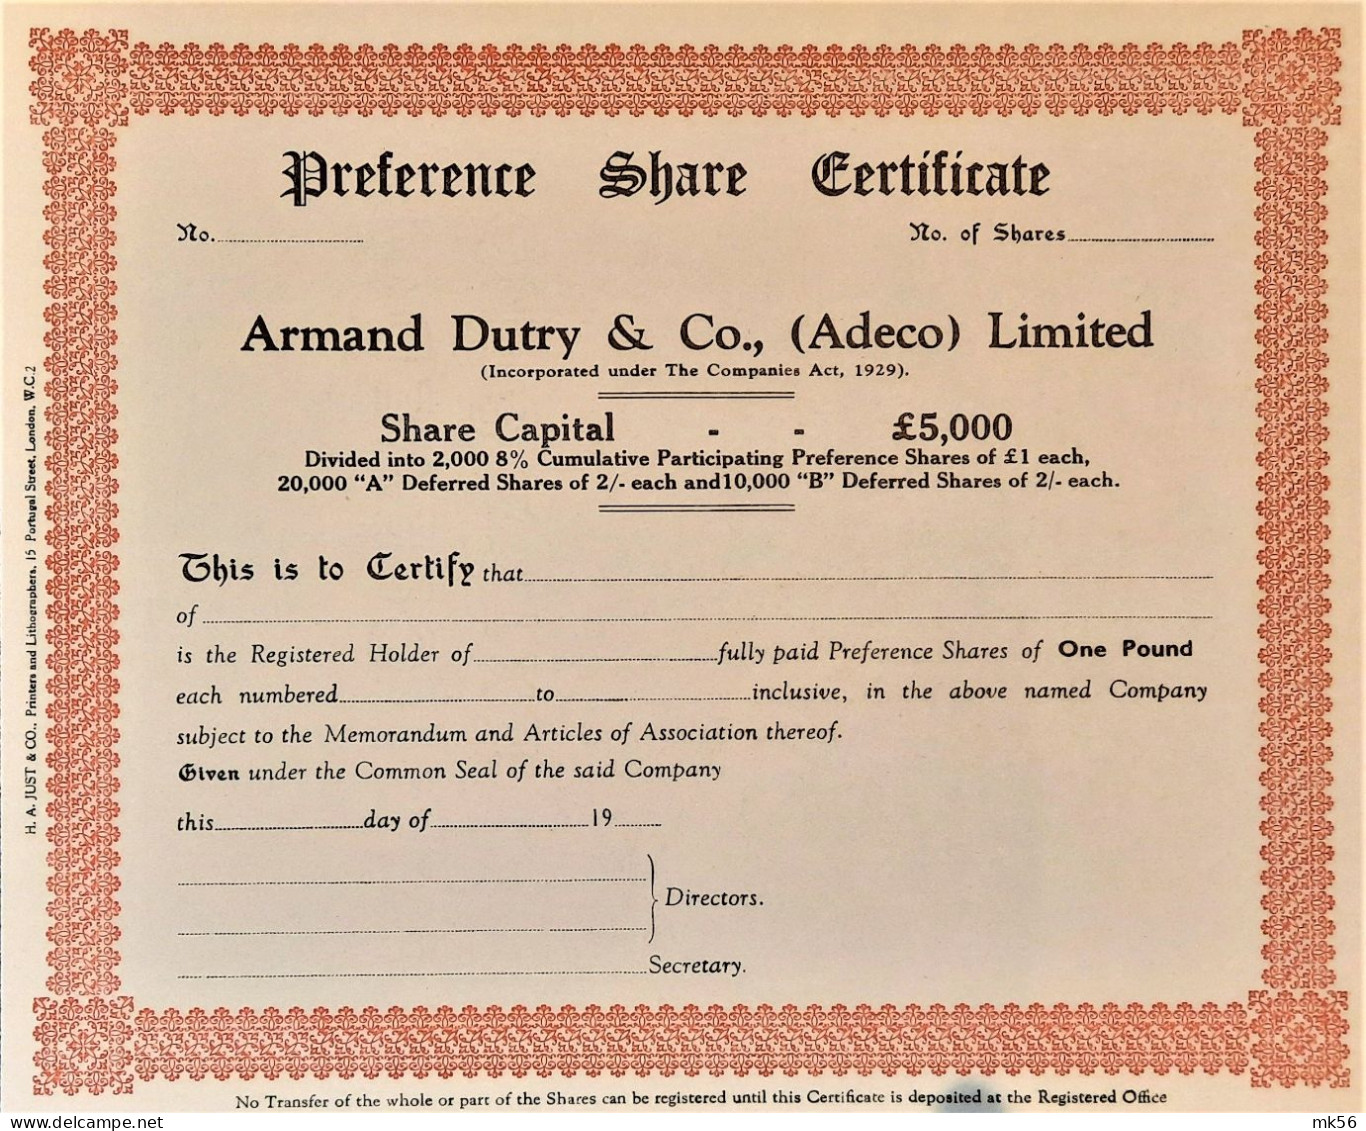 Preference Share Certificate (unissued) - Armand Dutry & Co (Adeco) - Industrie